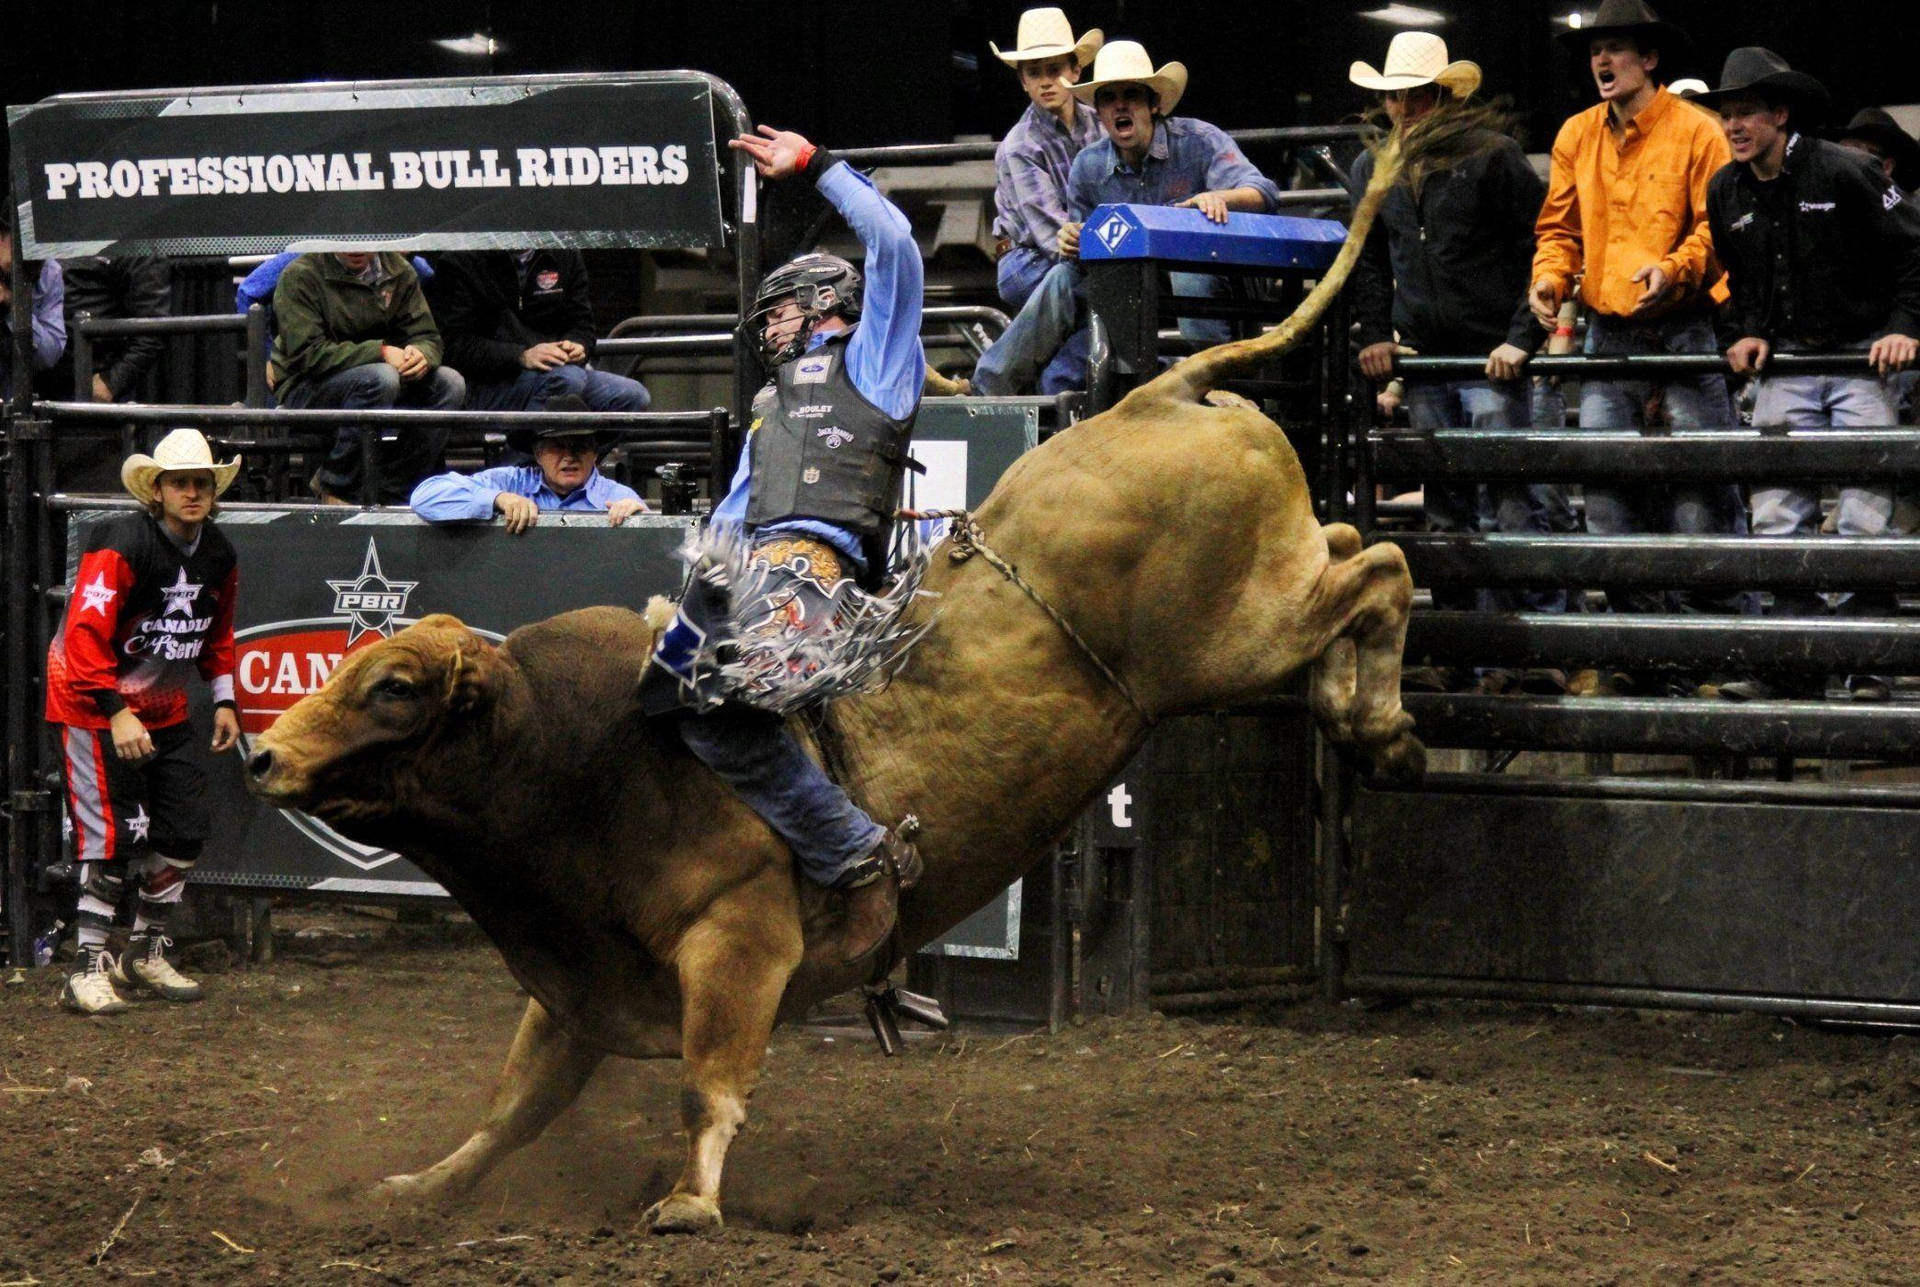 Professional Bull Riding Rodeo Background